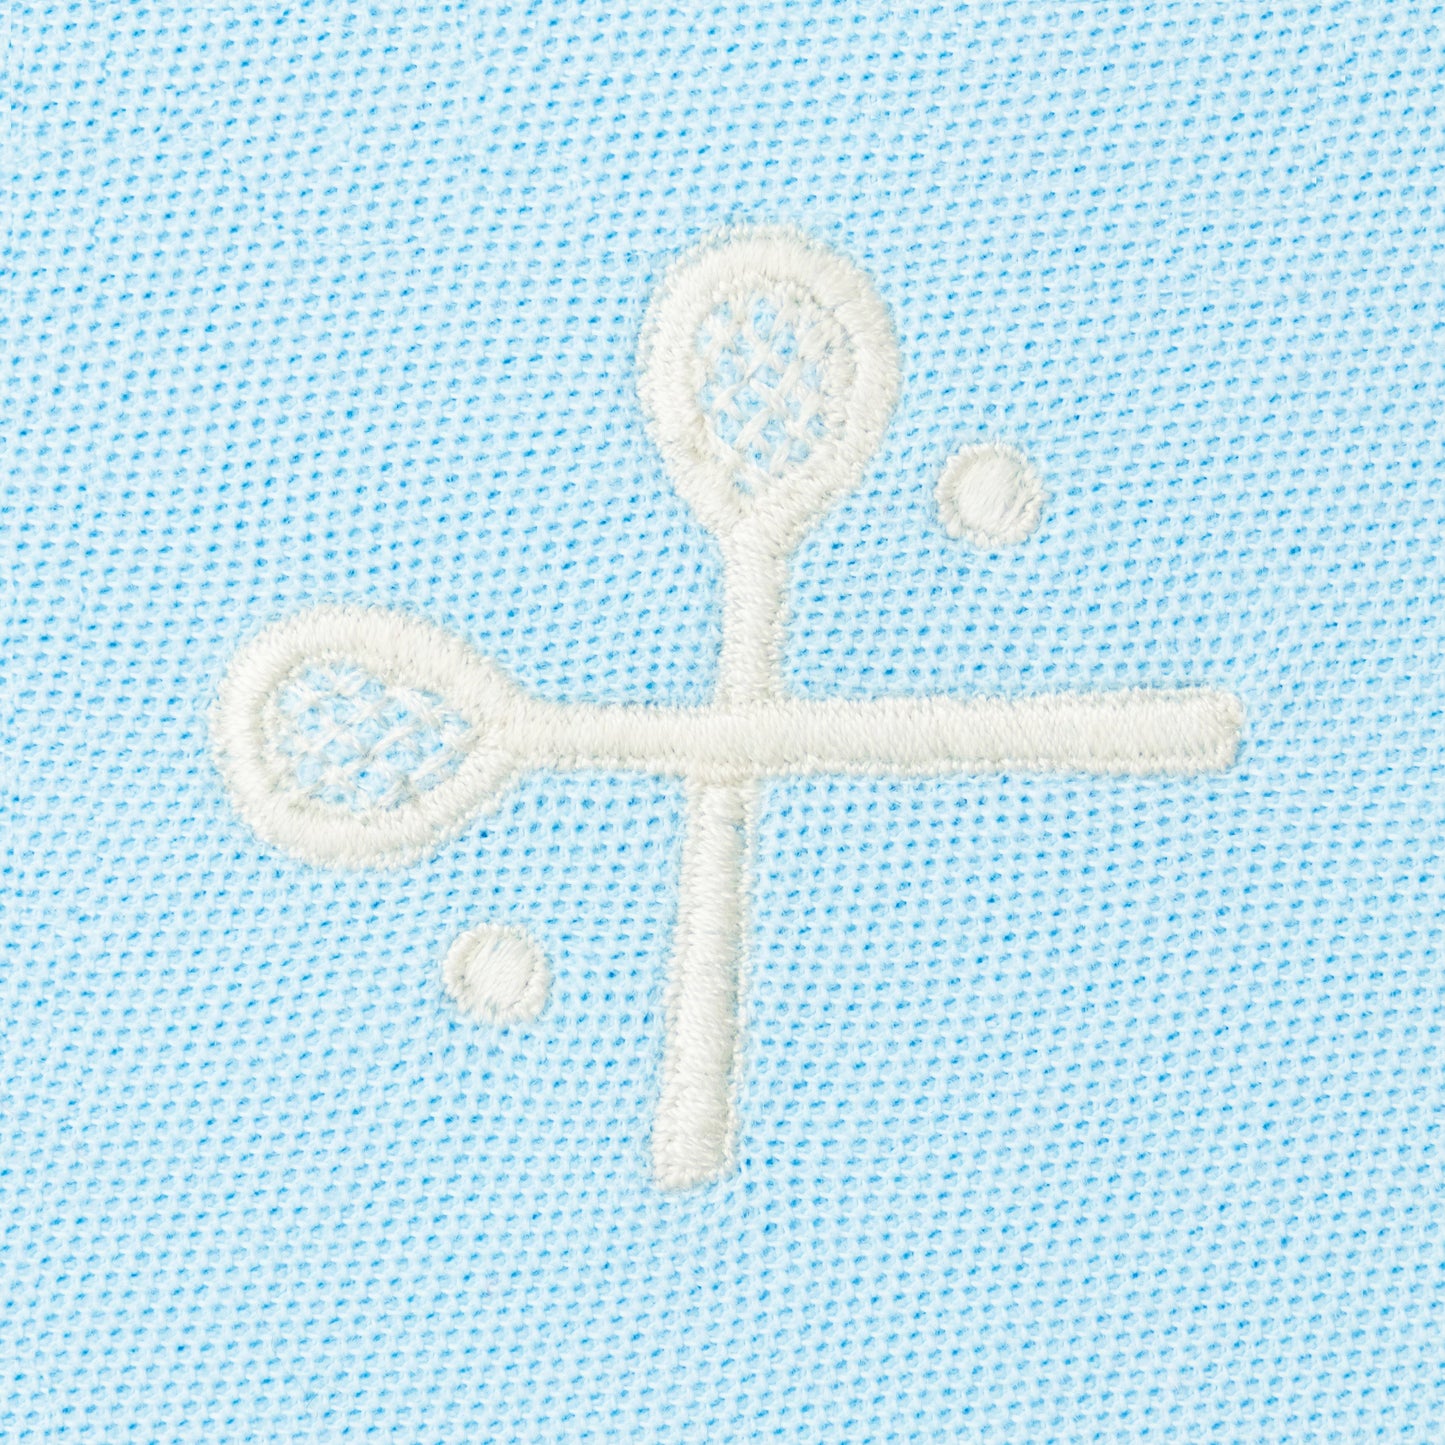 White embroidered crossed racquets motif on light blue polo.